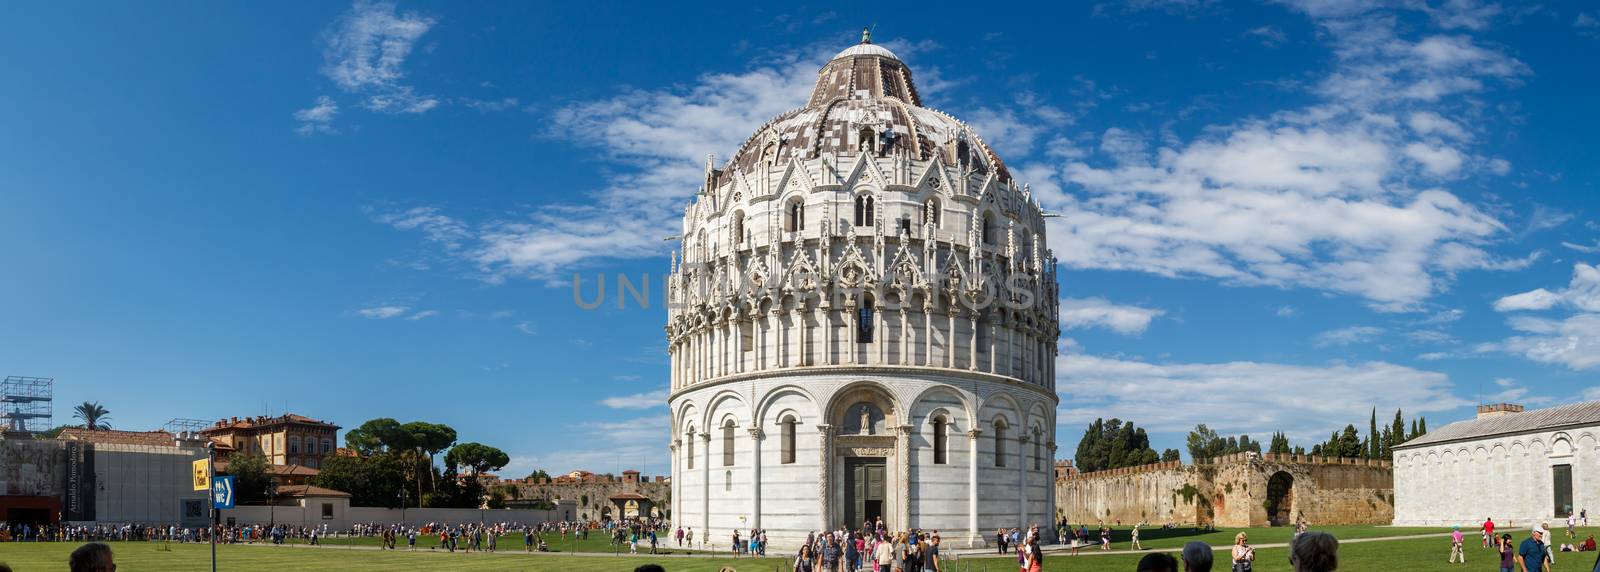 PISA, ITALY - SEPTEMBER 21, 2015 : View of Baptisery building in Cathedral Square in Pisa, Italy, on cloudy blue sky background.